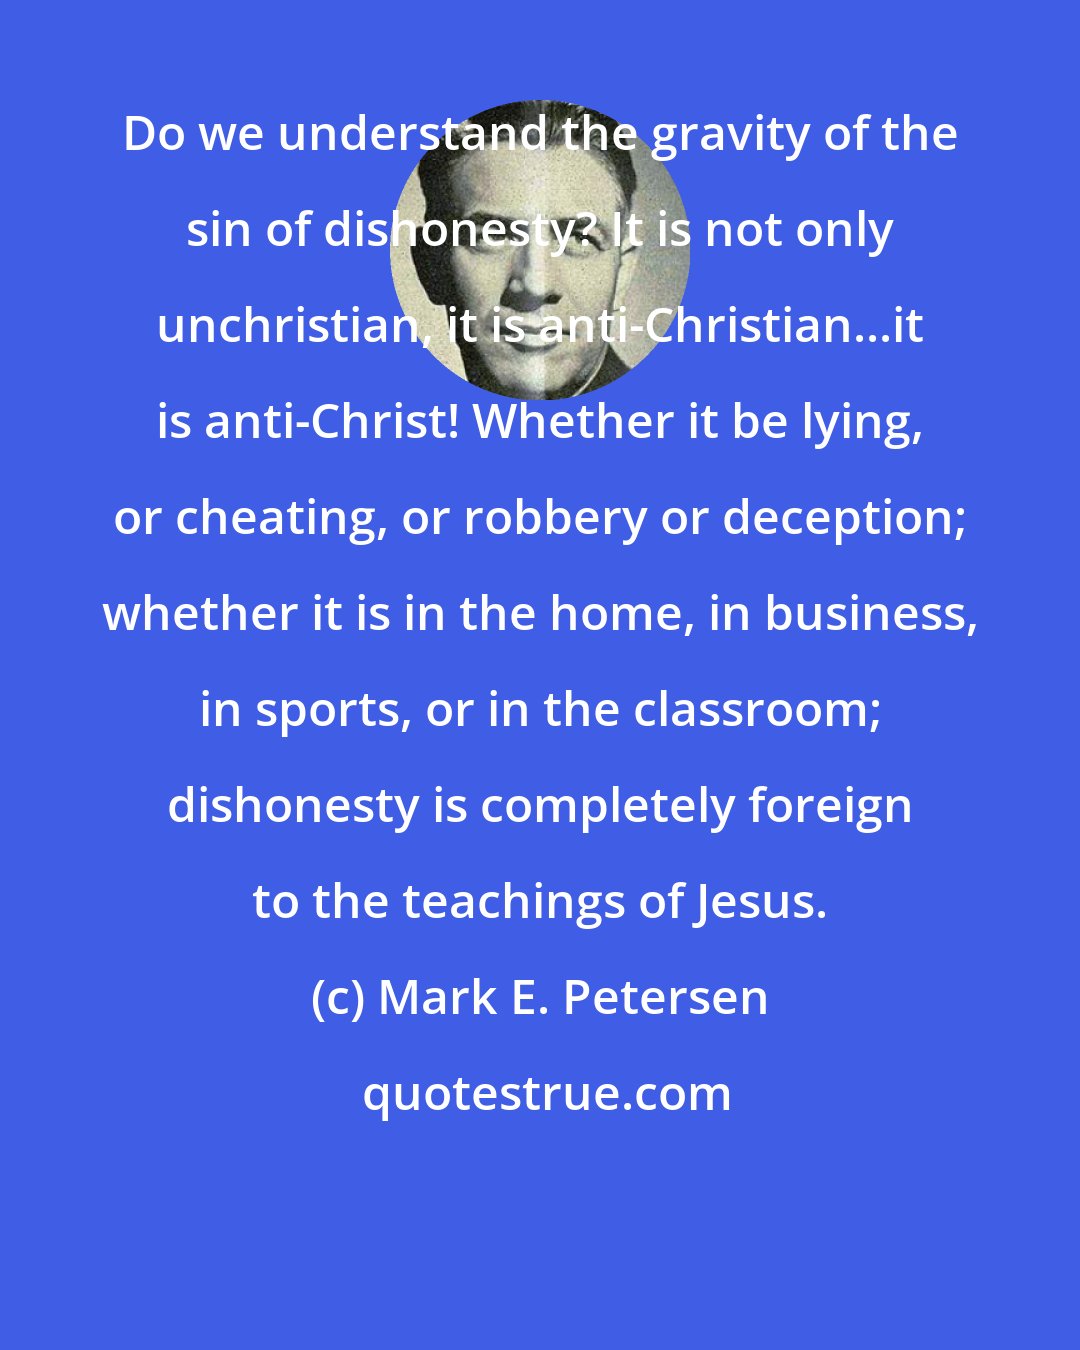 Mark E. Petersen: Do we understand the gravity of the sin of dishonesty? It is not only unchristian, it is anti-Christian...it is anti-Christ! Whether it be lying, or cheating, or robbery or deception; whether it is in the home, in business, in sports, or in the classroom; dishonesty is completely foreign to the teachings of Jesus.